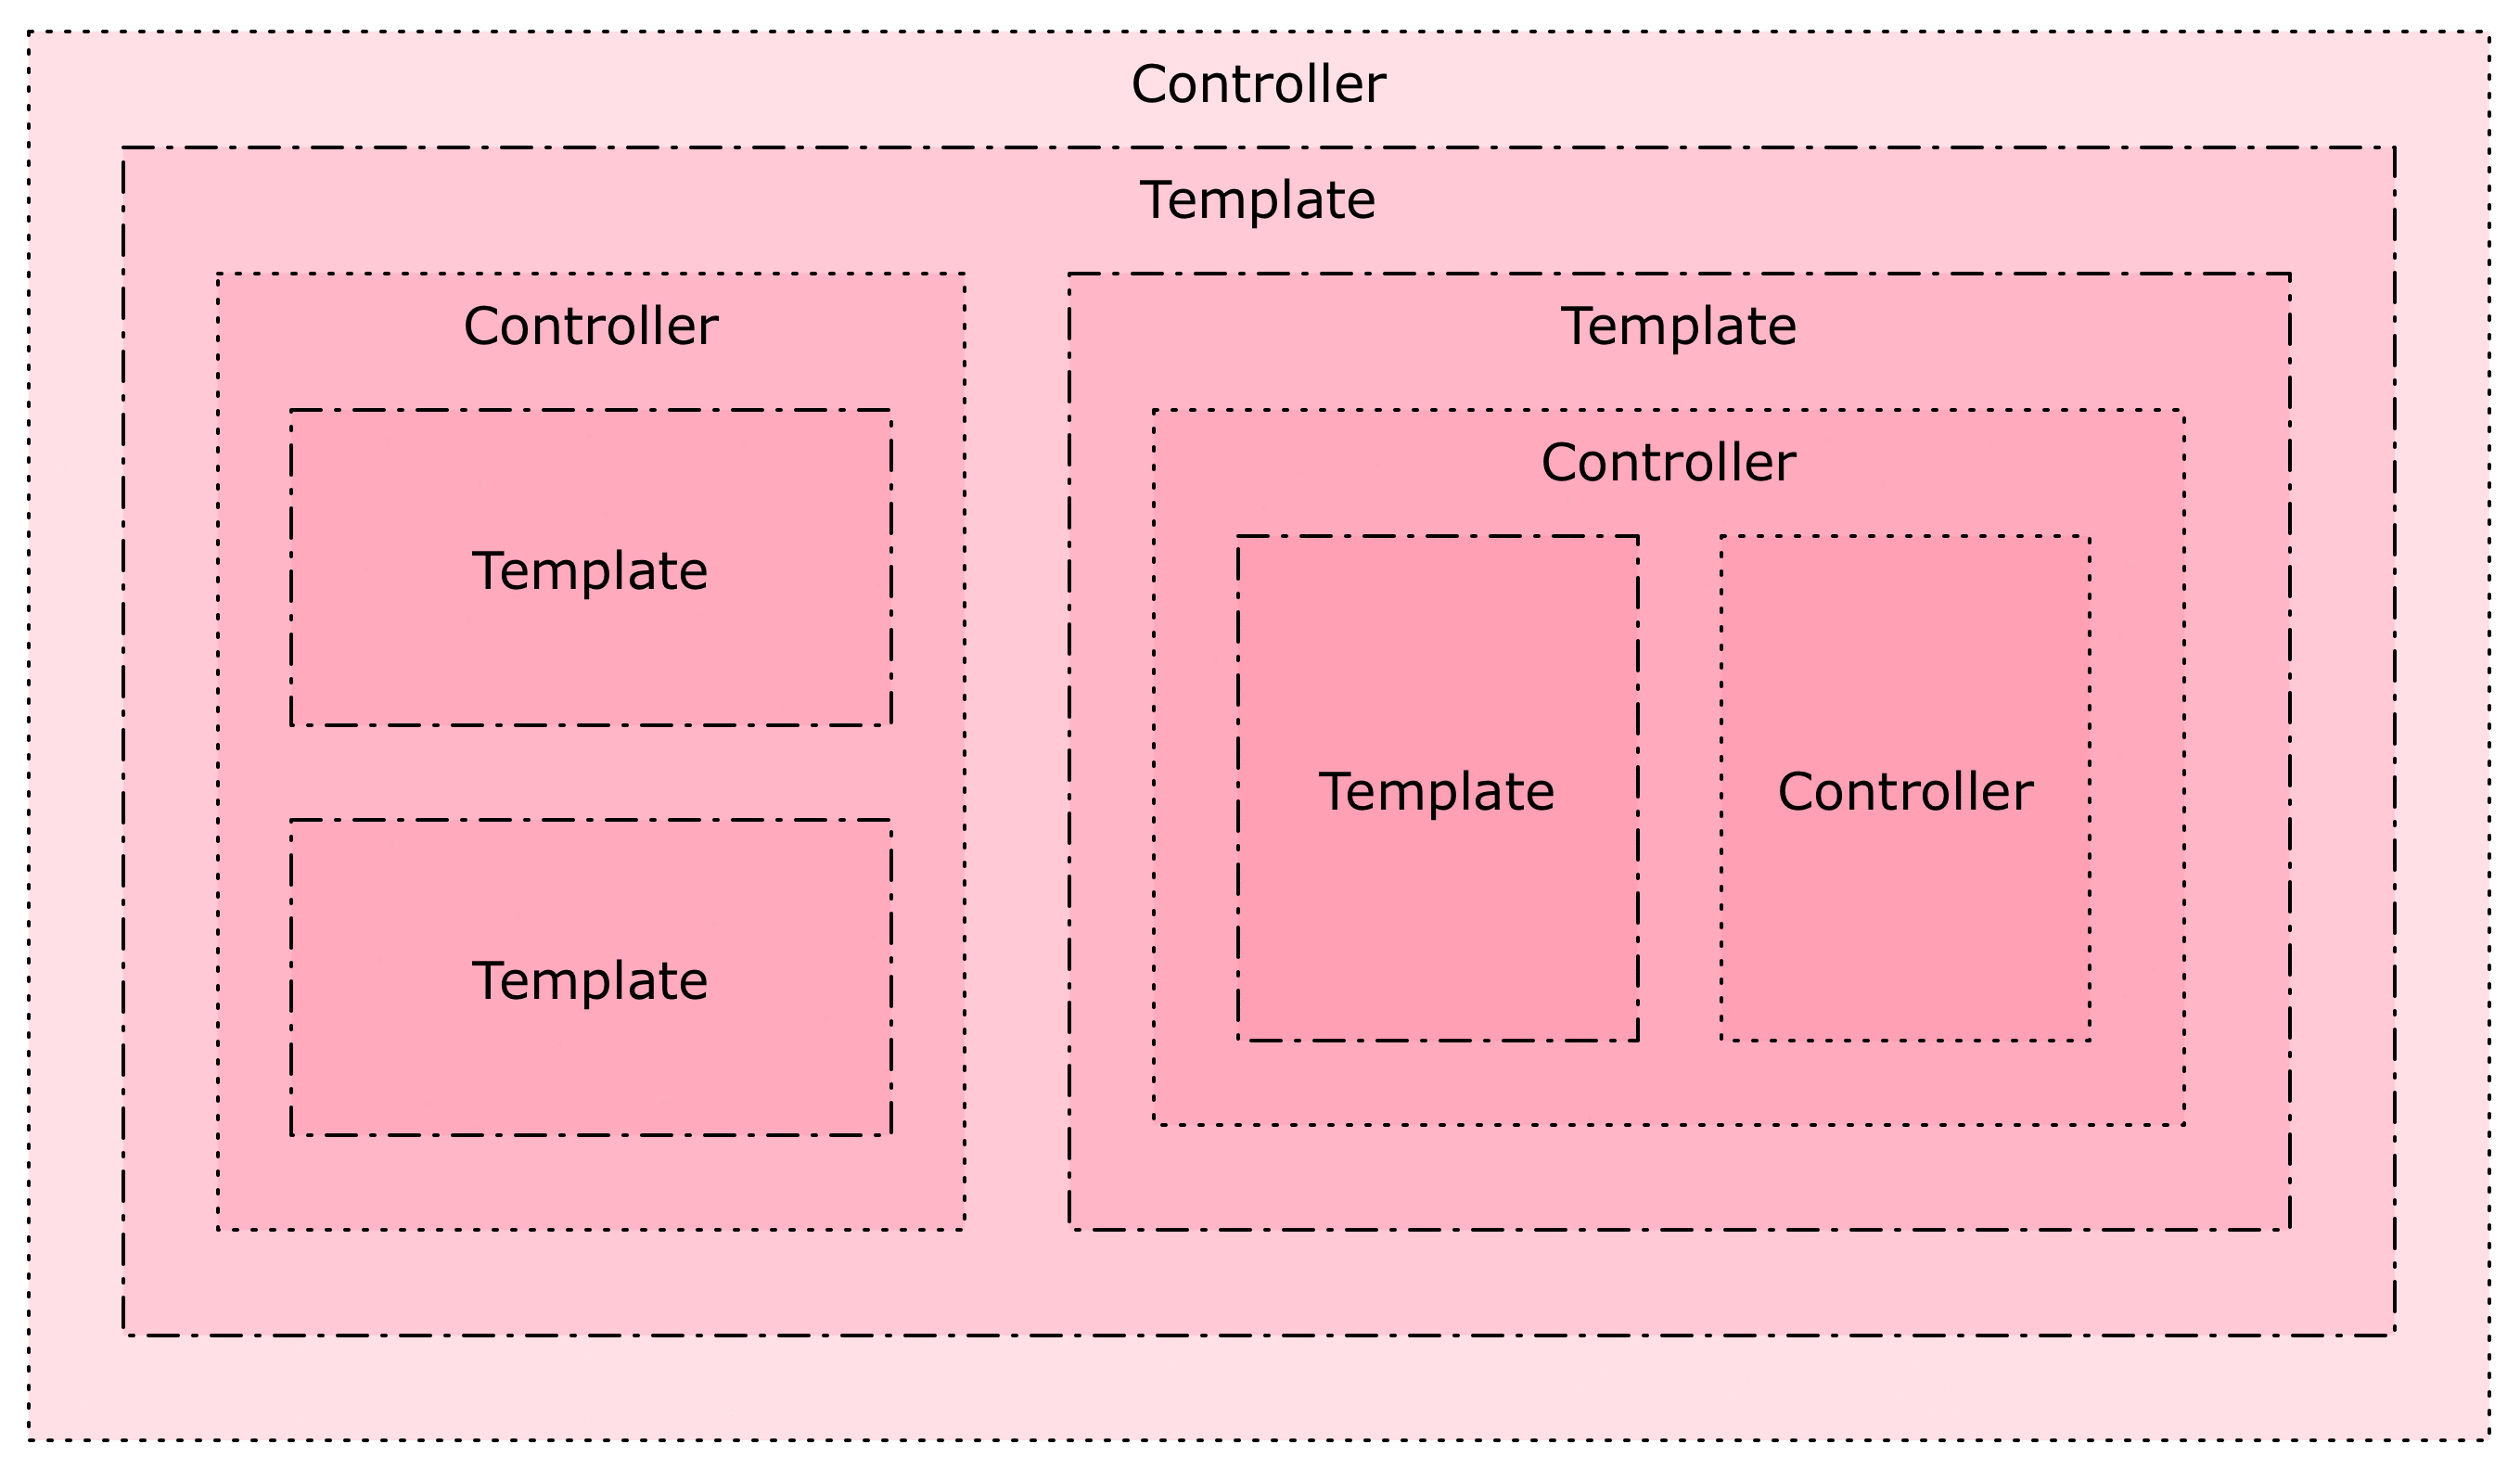 component_refac